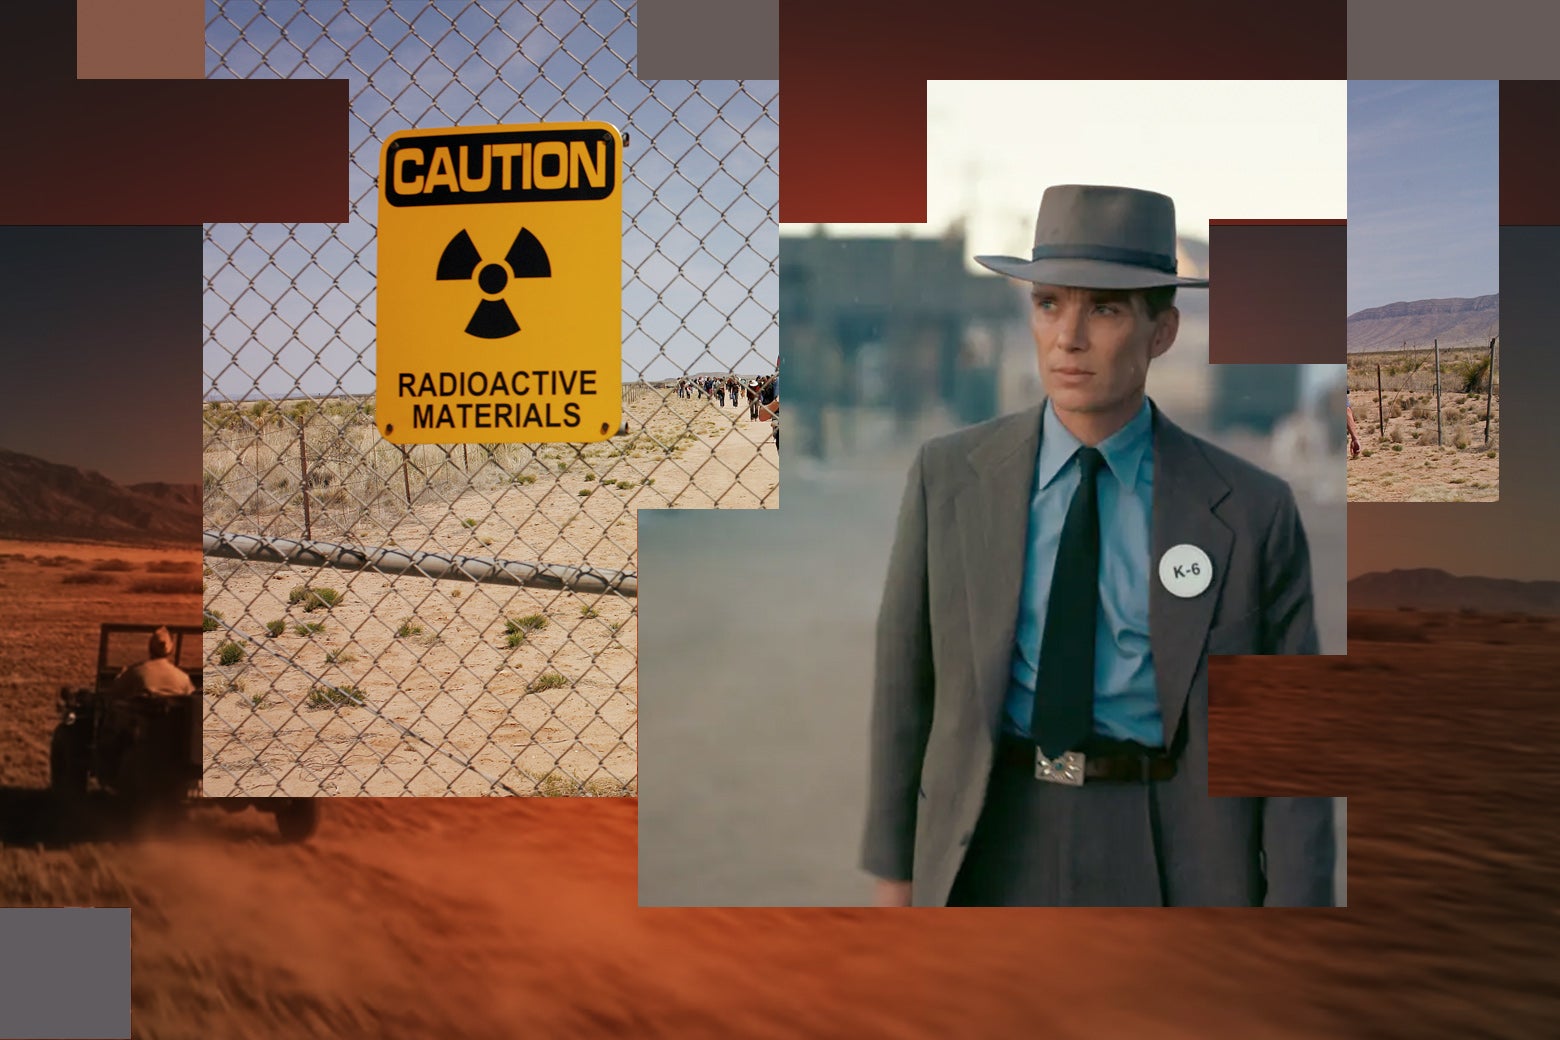 A collage of desert photos, nuclear warning signs, and Cillian Murphy as Oppenheimer.